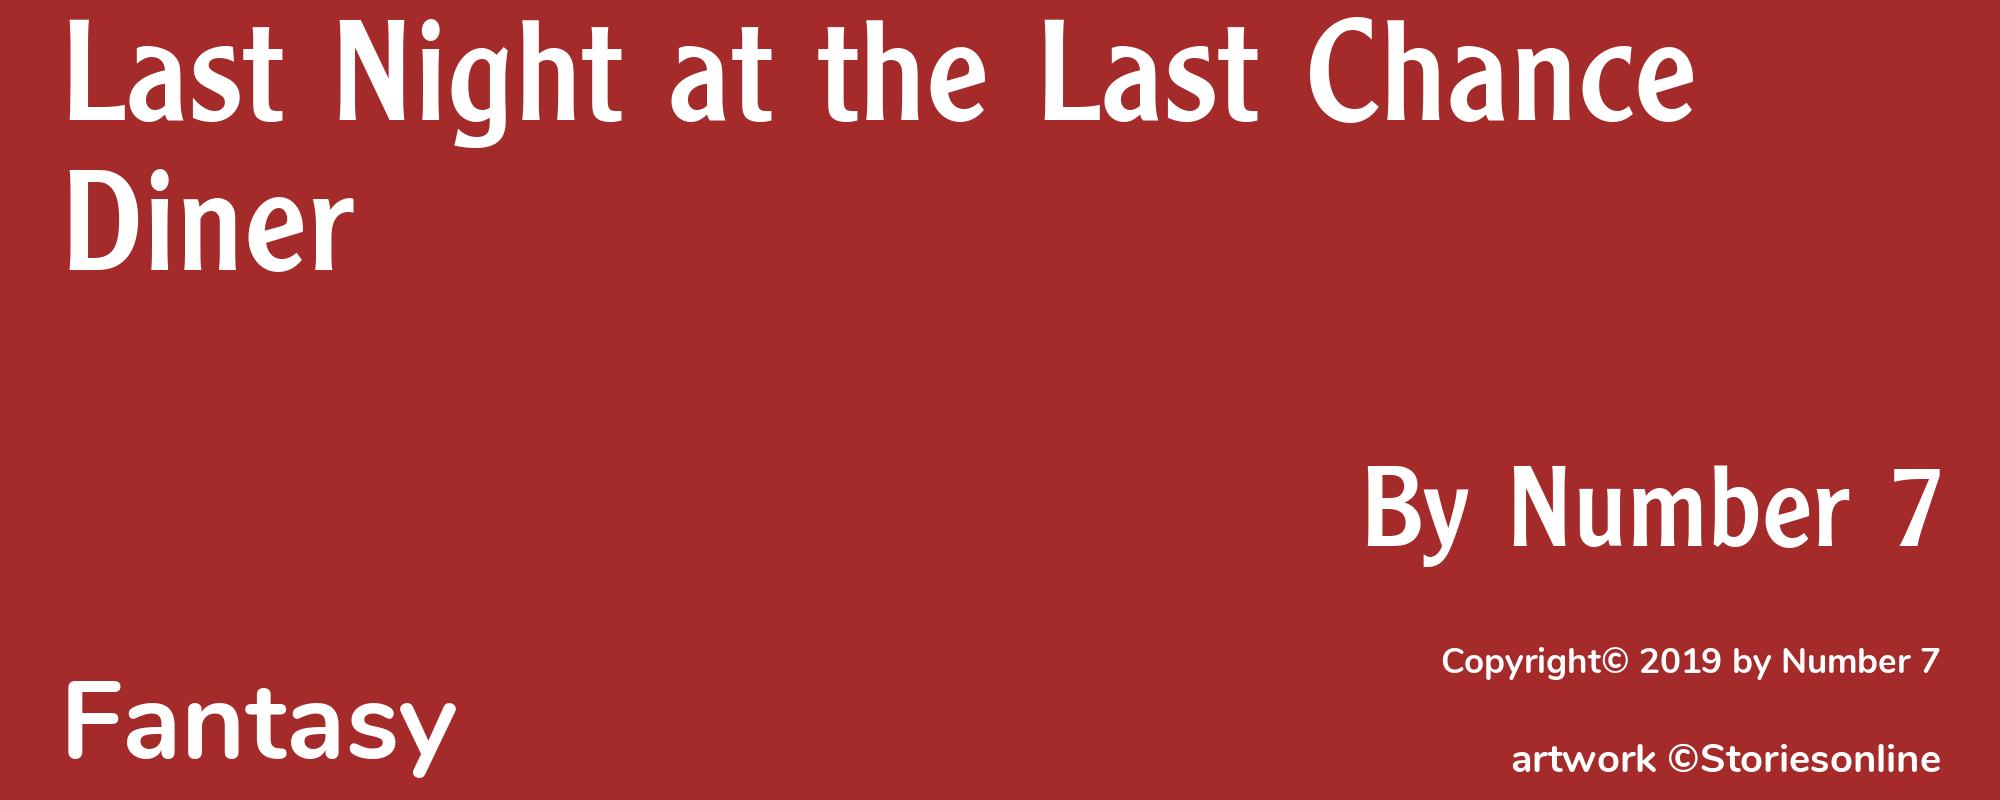 Last Night at the Last Chance Diner - Cover